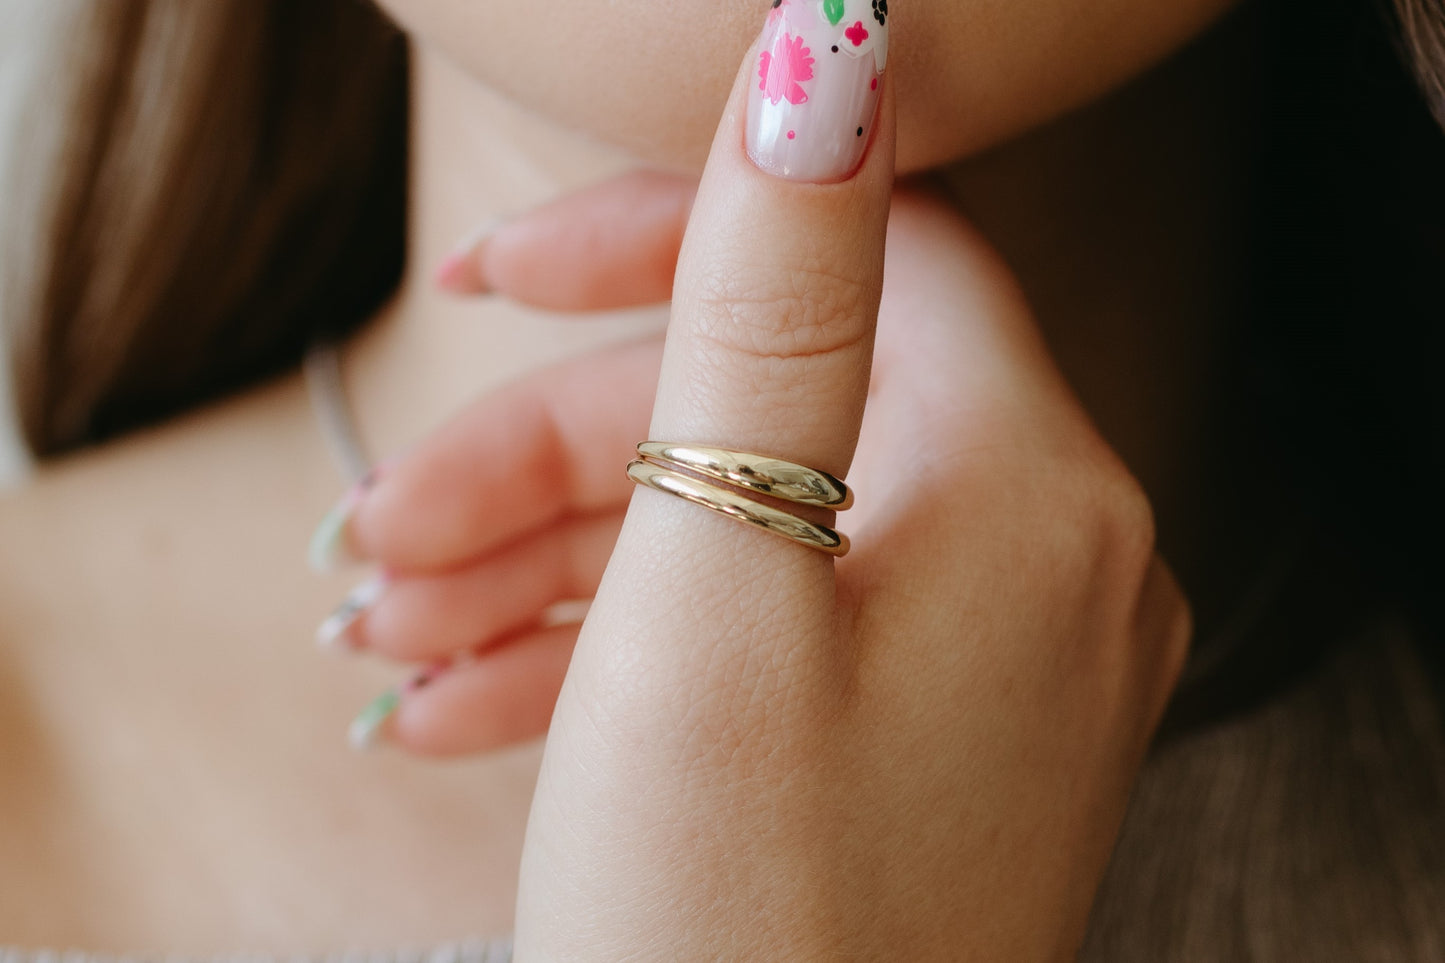 Dainty Dome Ring